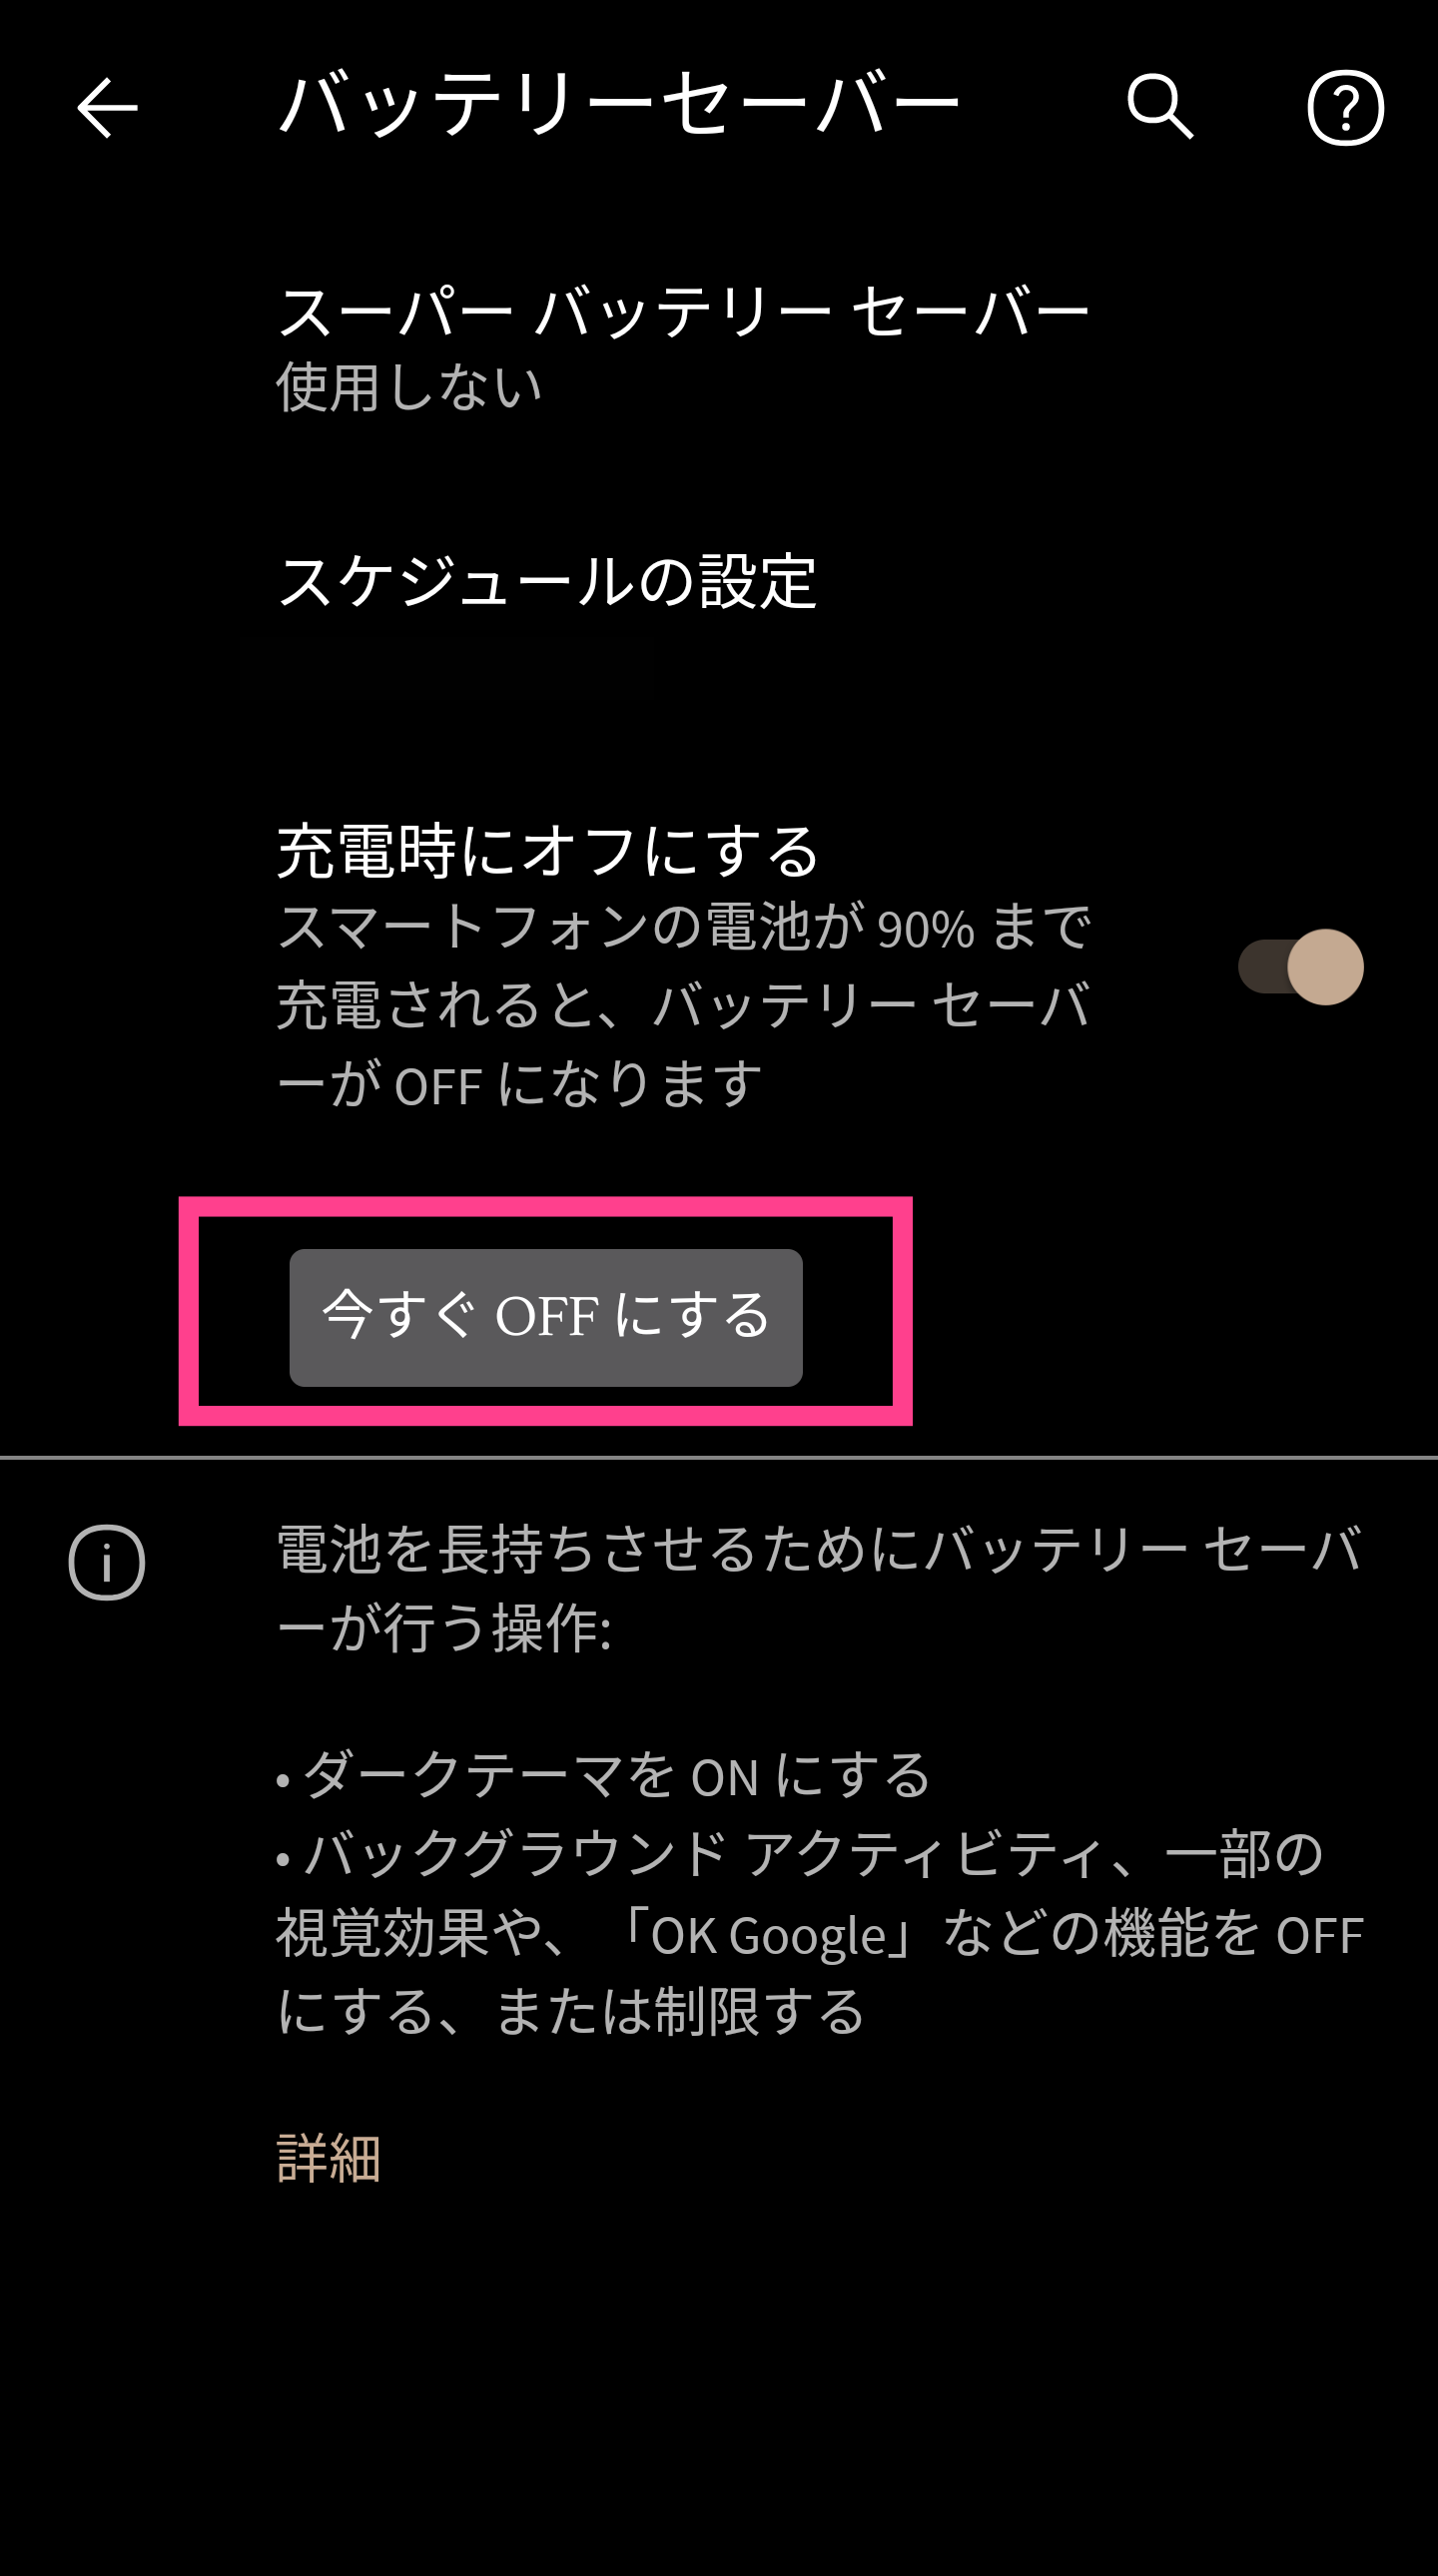 Android-バッテリーセーバー設定